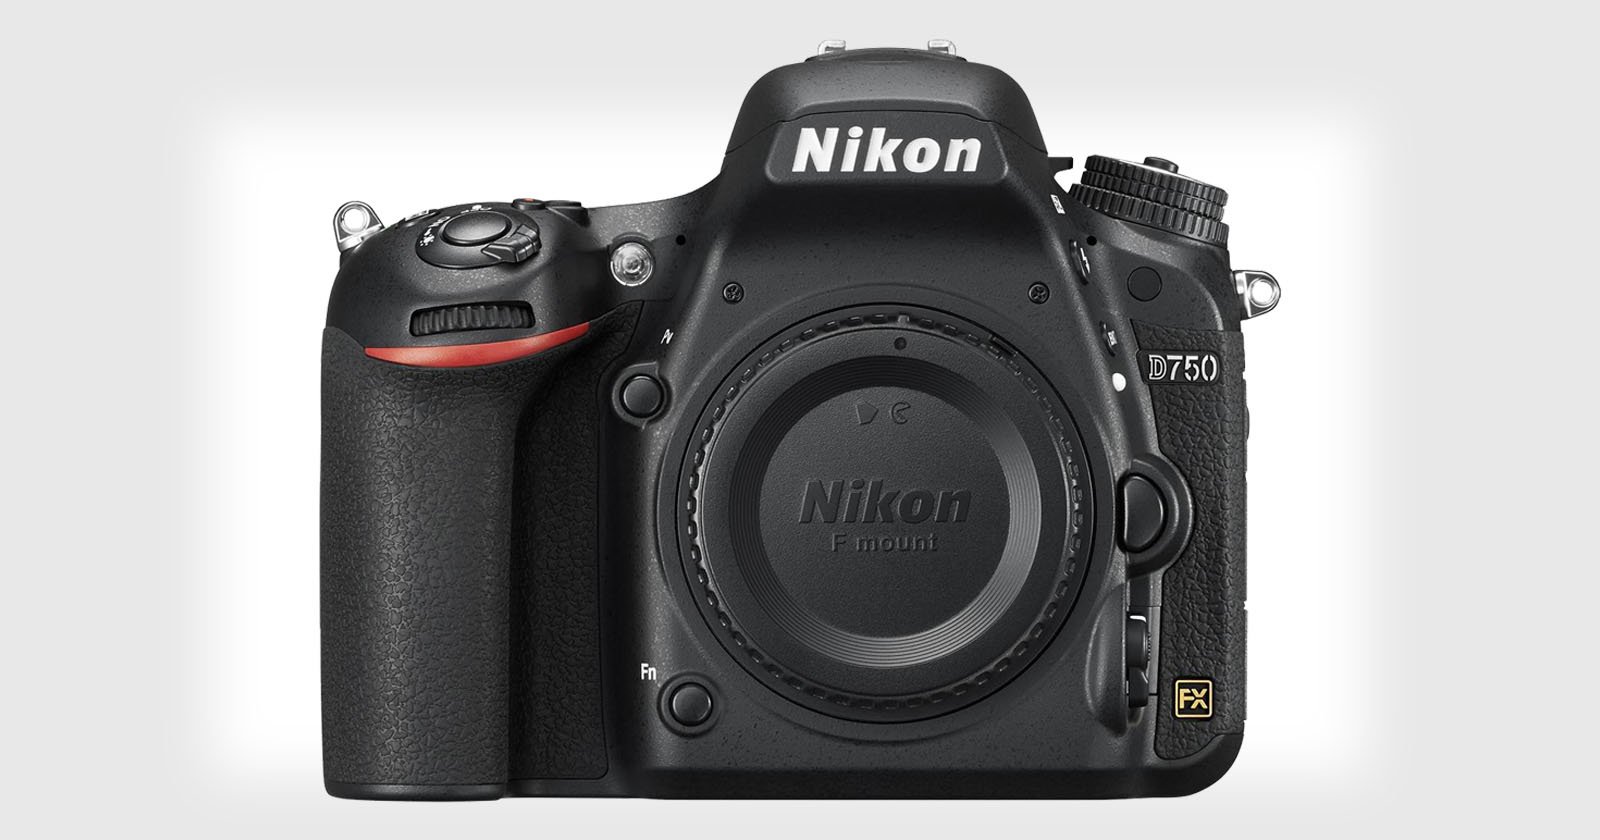 Nikon D750 Replacement Coming in Early 2020 with 24MP Sensor, Better AF and More: Report